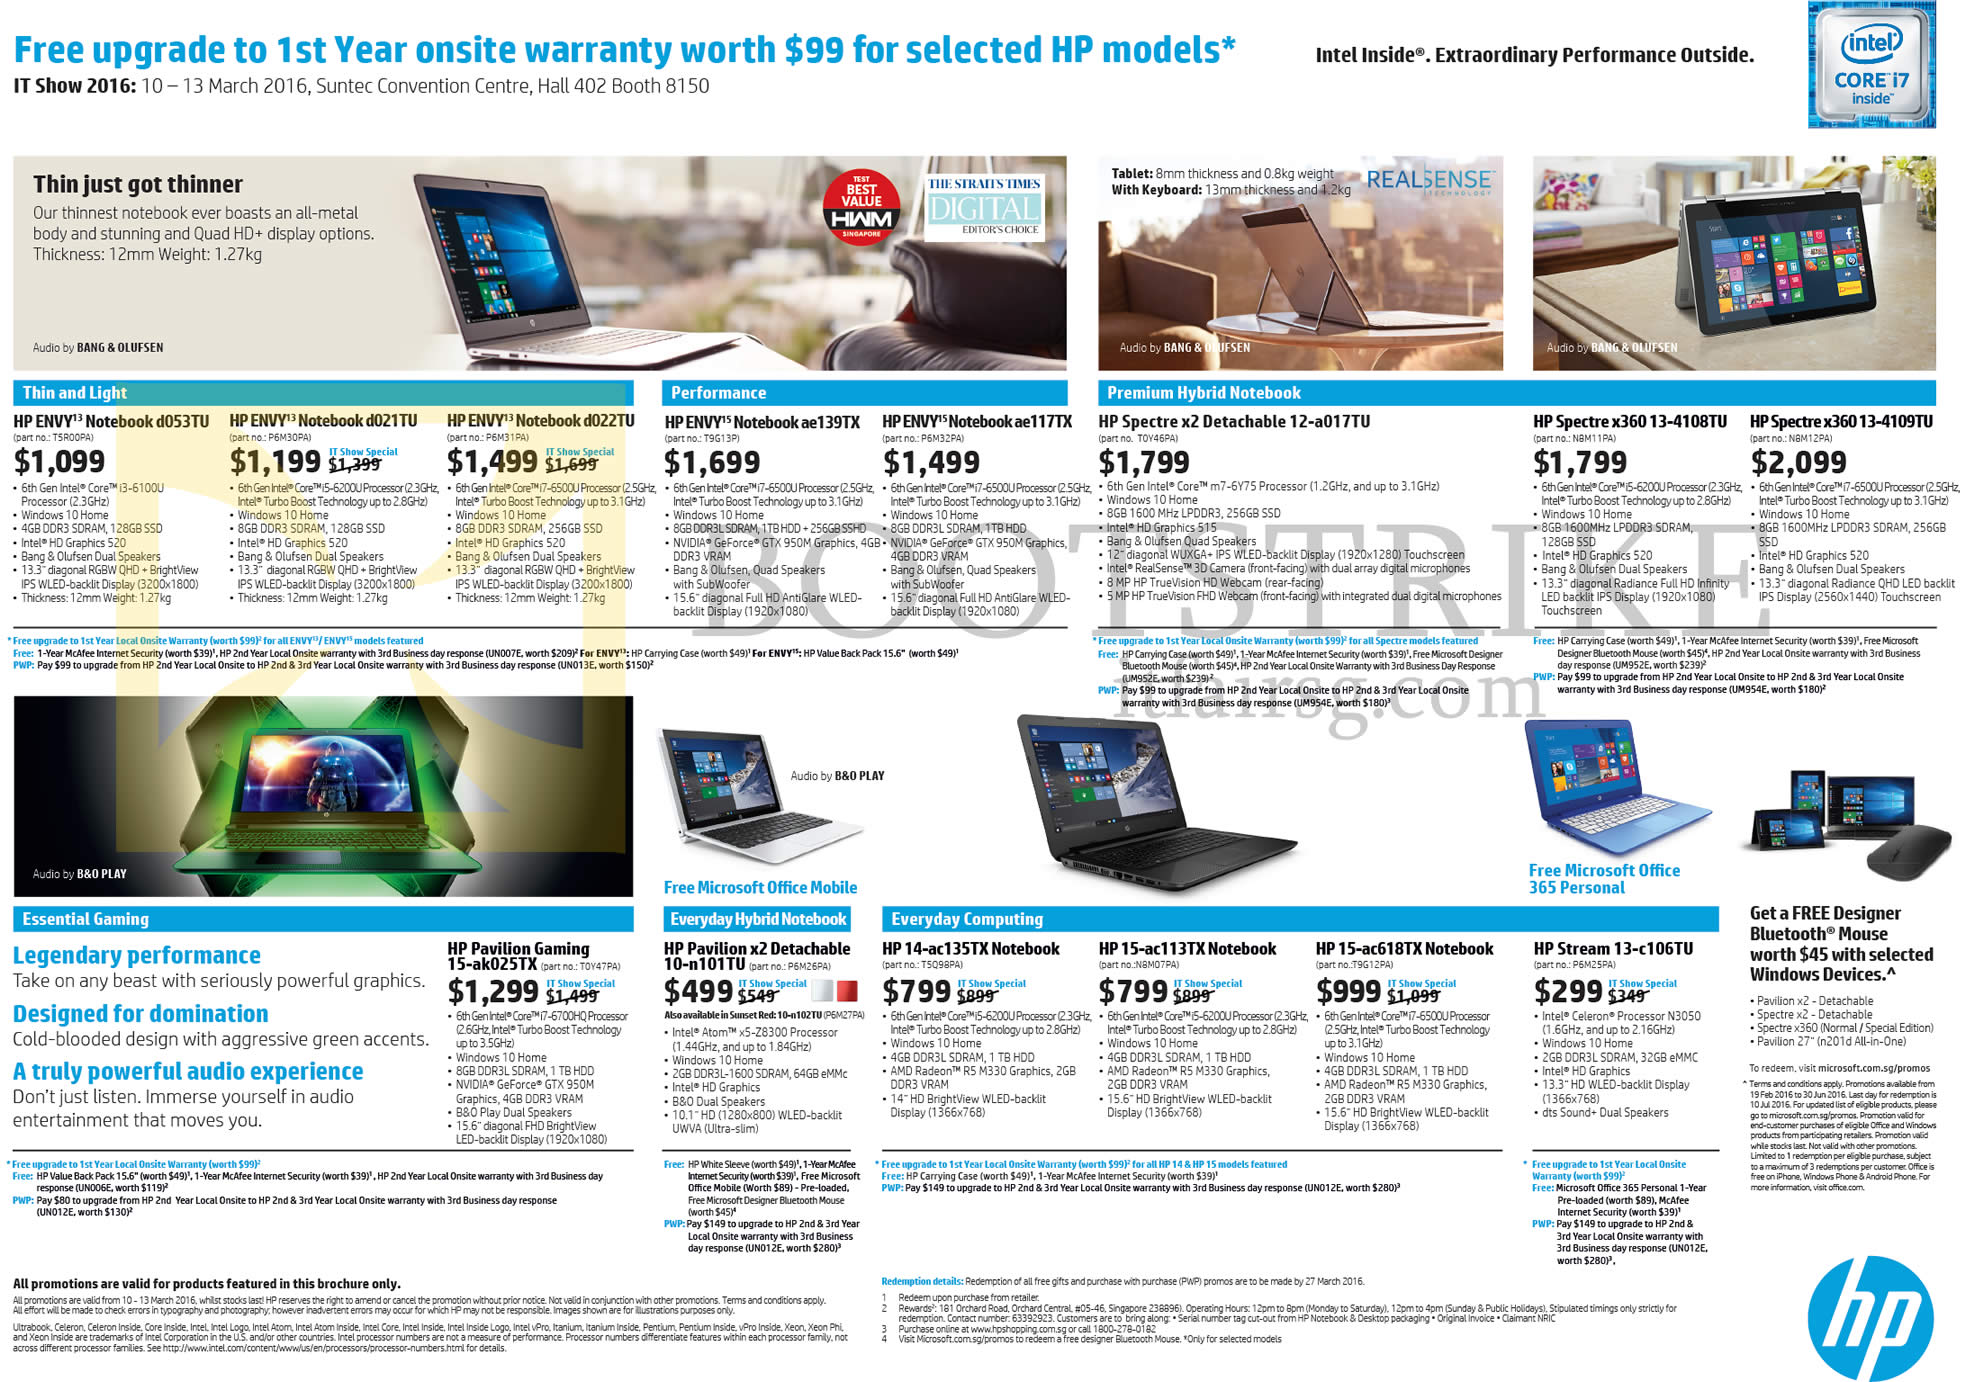 IT SHOW 2016 price list image brochure of HP Notebooks Envy, Spectre X2, Spectre X360, Gaming, Detachable, Stream